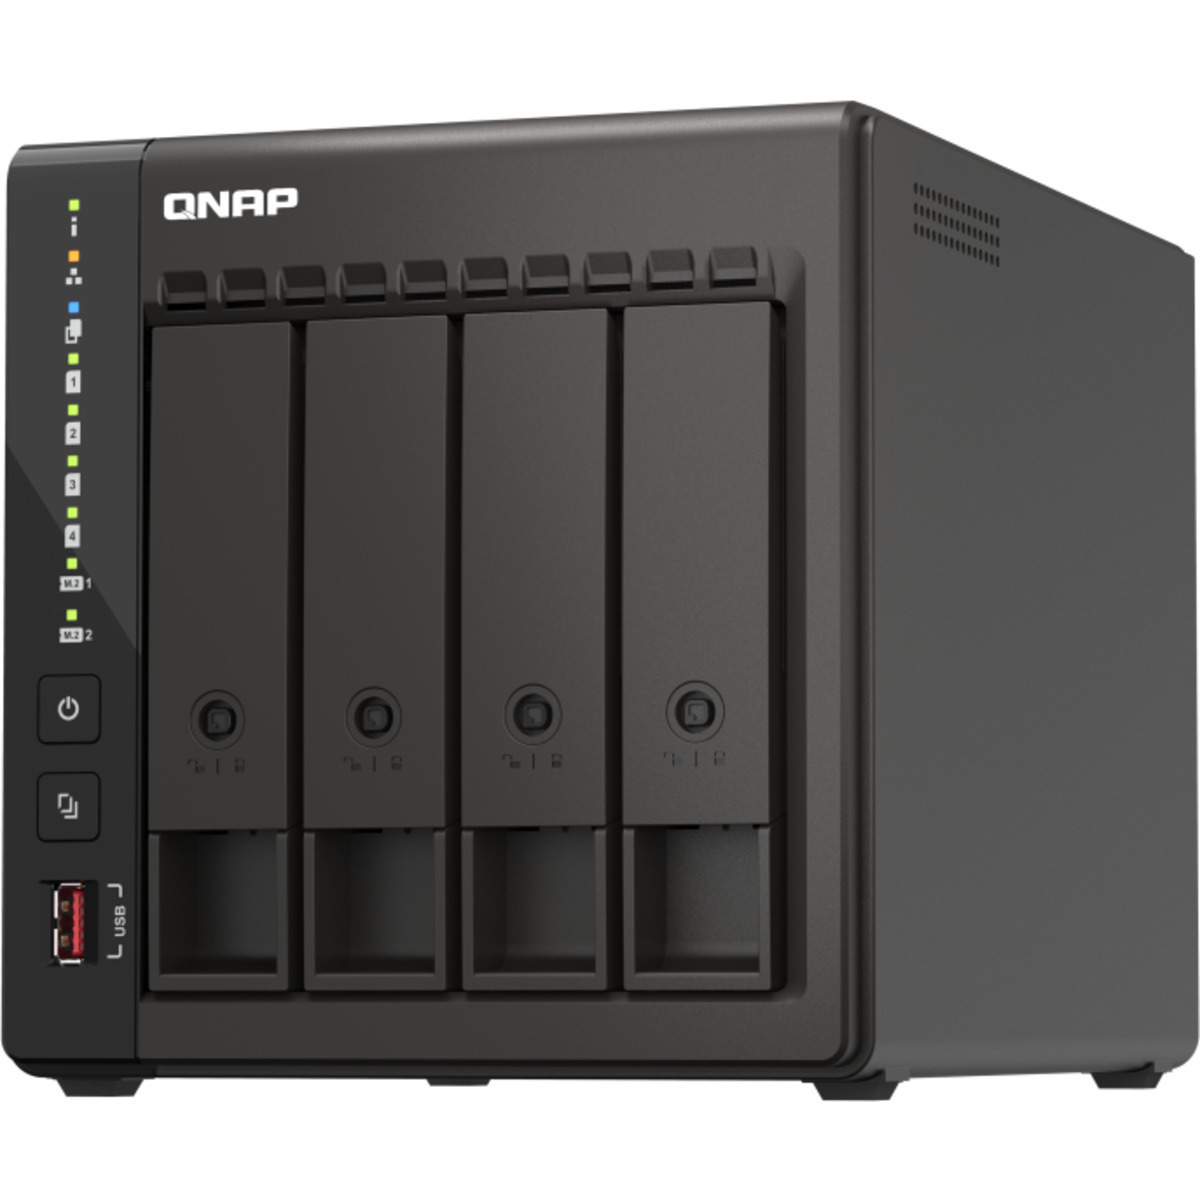 QNAP TS-453E 42tb 4-Bay Desktop Multimedia / Power User / Business NAS - Network Attached Storage Device 3x14tb Seagate IronWolf Pro ST14000NT001 3.5 7200rpm SATA 6Gb/s HDD NAS Class Drives Installed - Burn-In Tested TS-453E